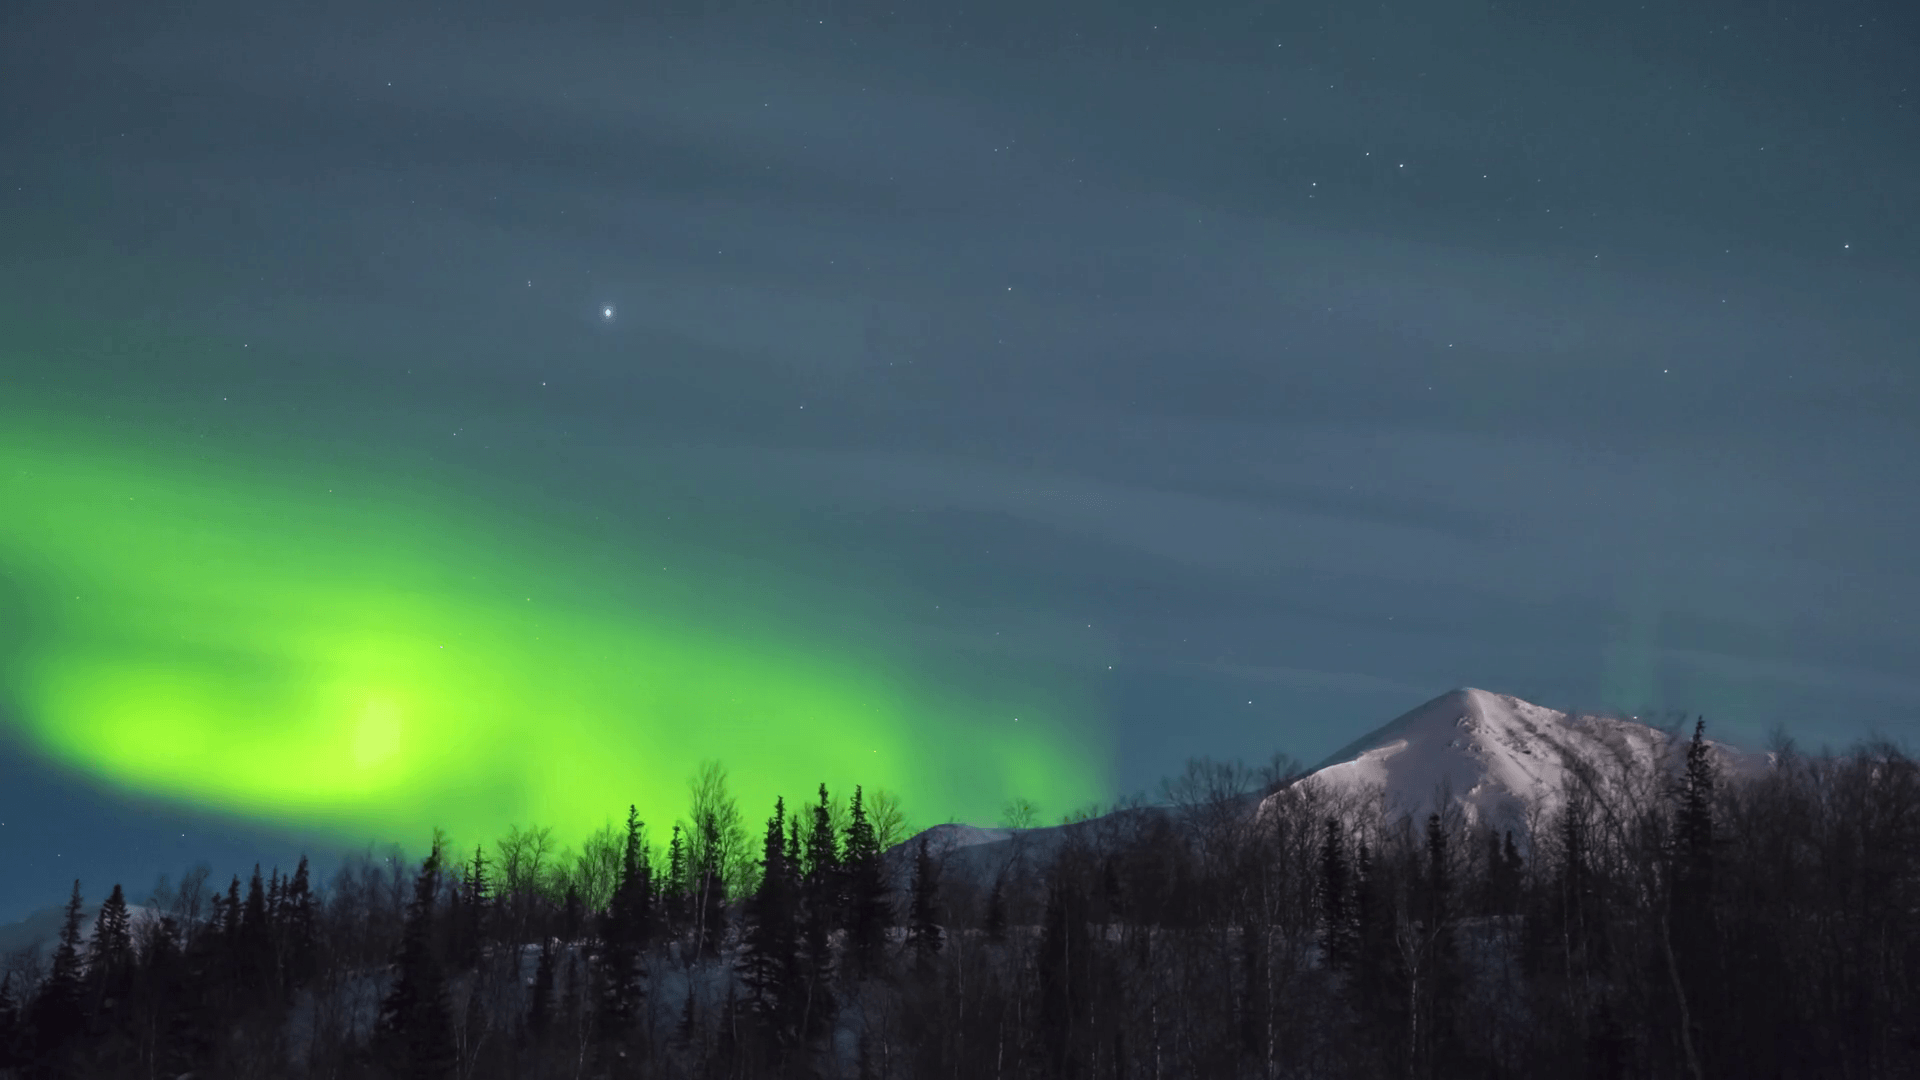 Time Lapse of Green Northern Lights. Snowy Mountain and Trees at